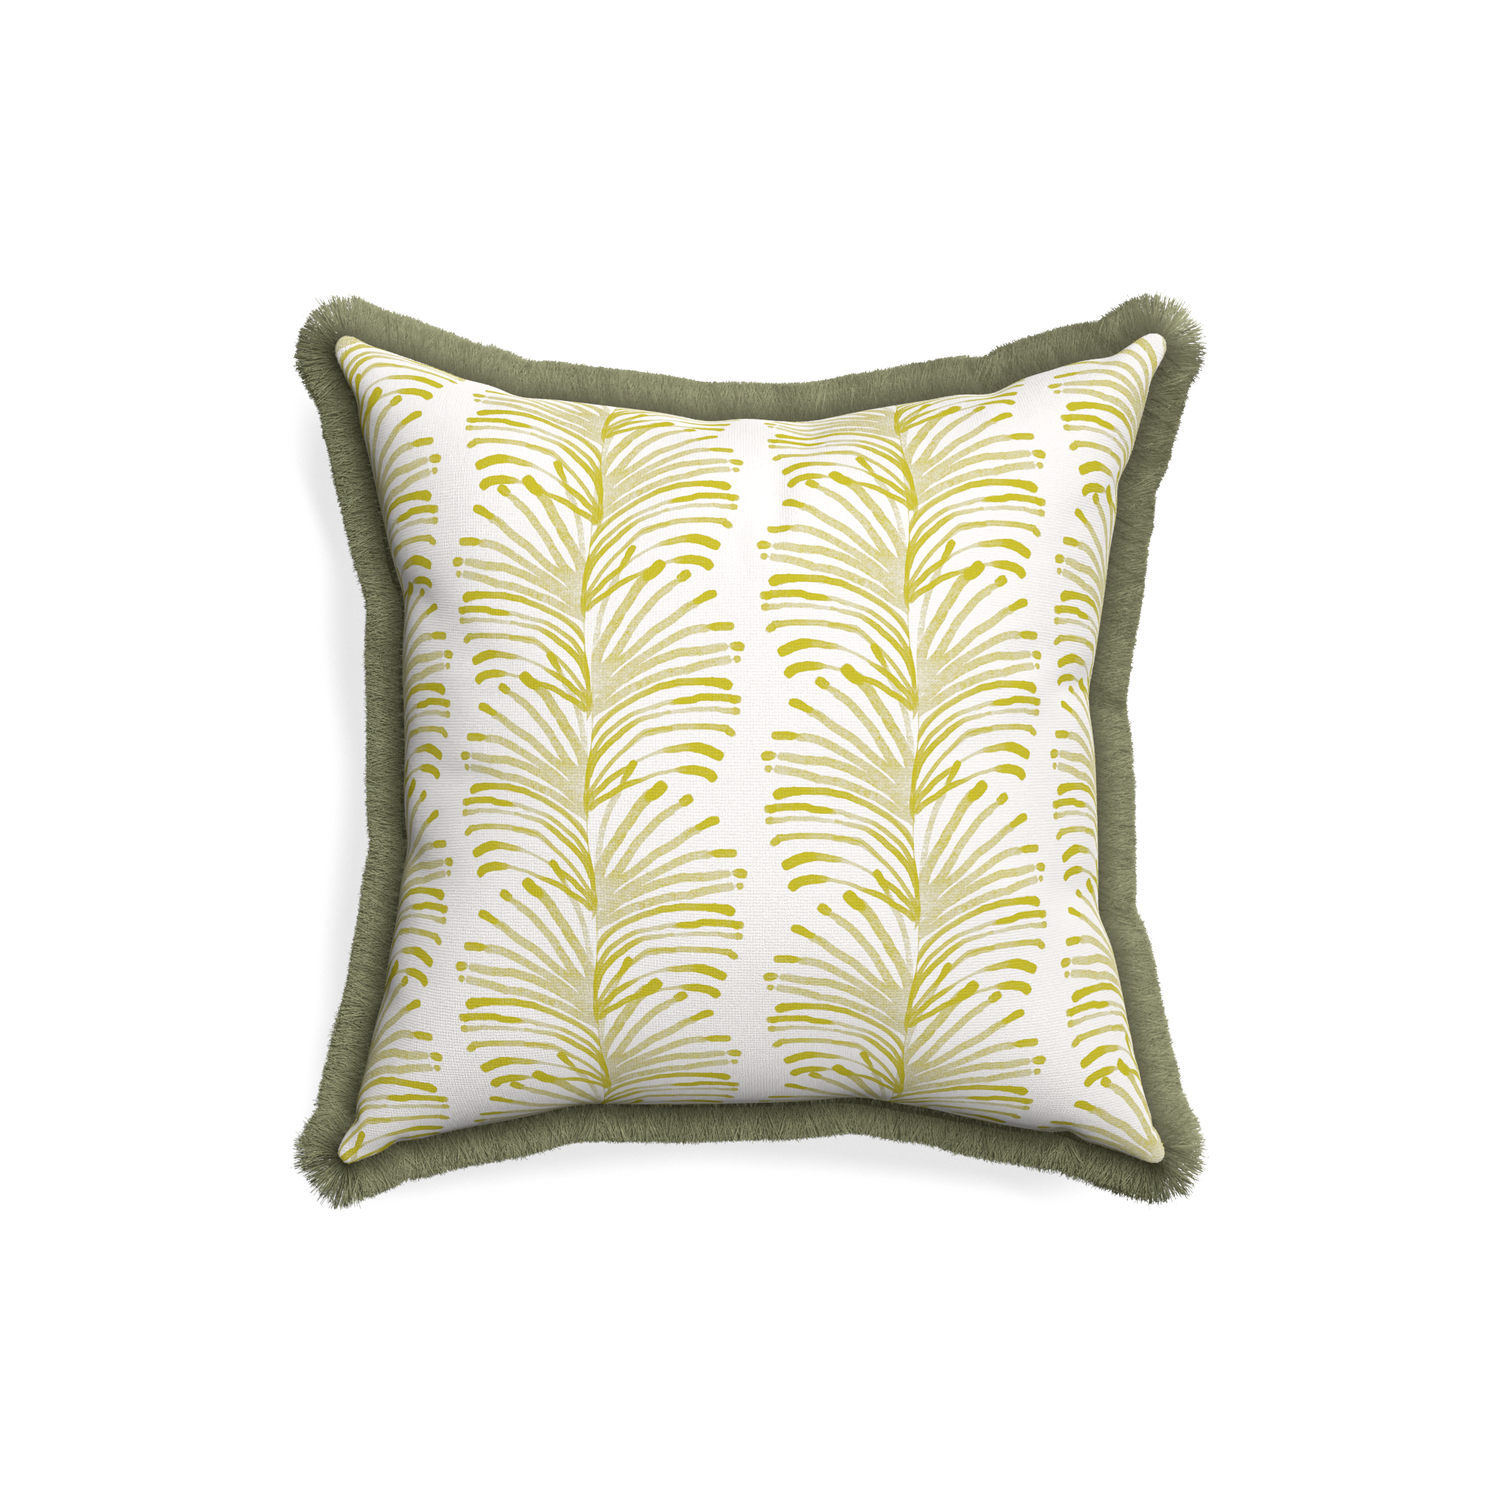 18-square emma chartreuse custom pillow with sage fringe on white background